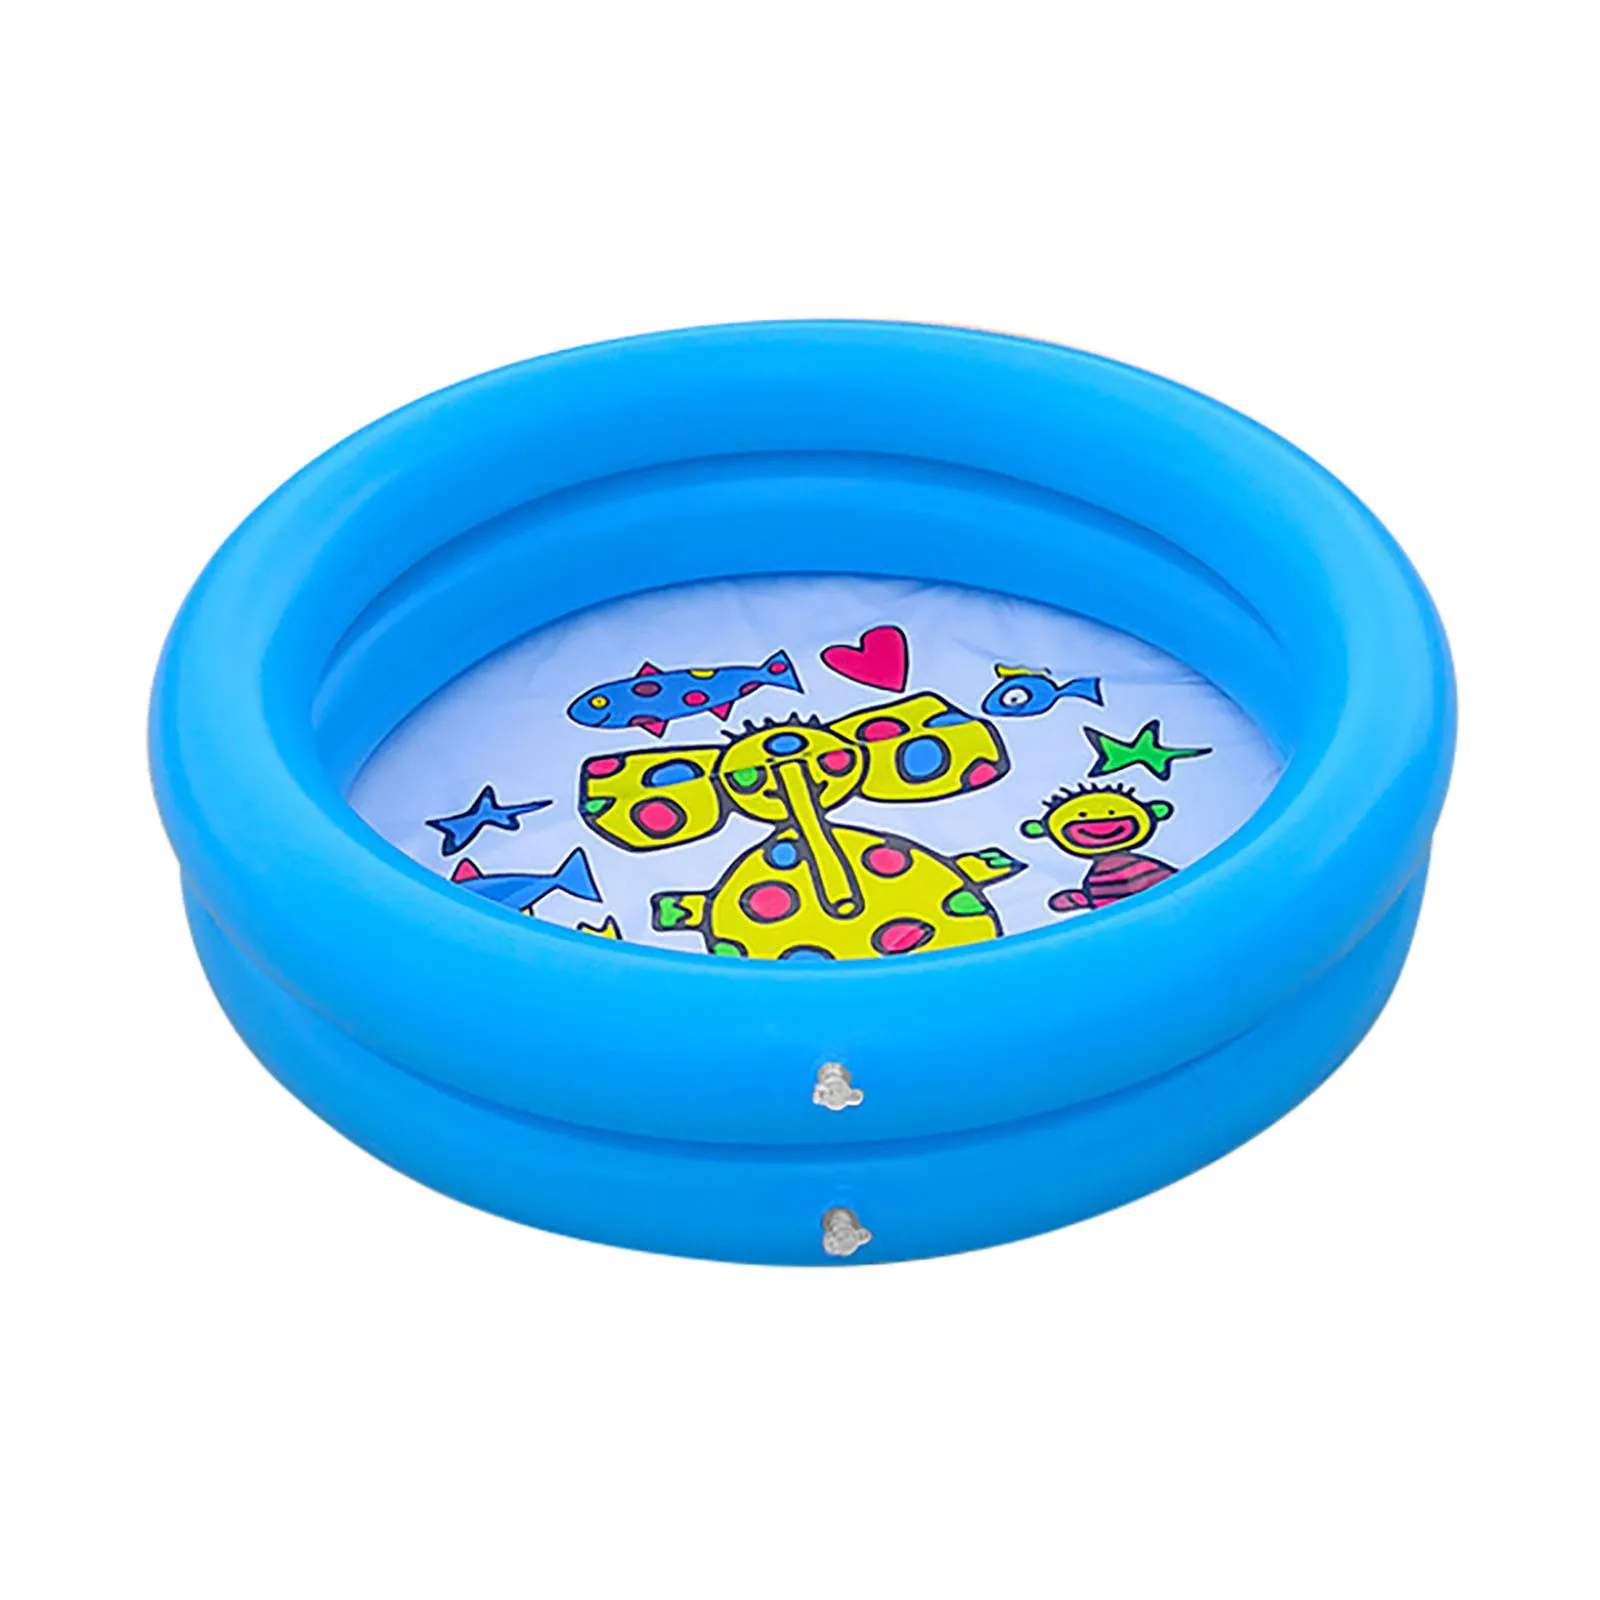 60cm Double Layer Baby Inflatable Swimming Pool Kids Toy Play Children Round Basin Bathtub Kids Outdoors Water Game|Pool & Accessories| - AliExpress